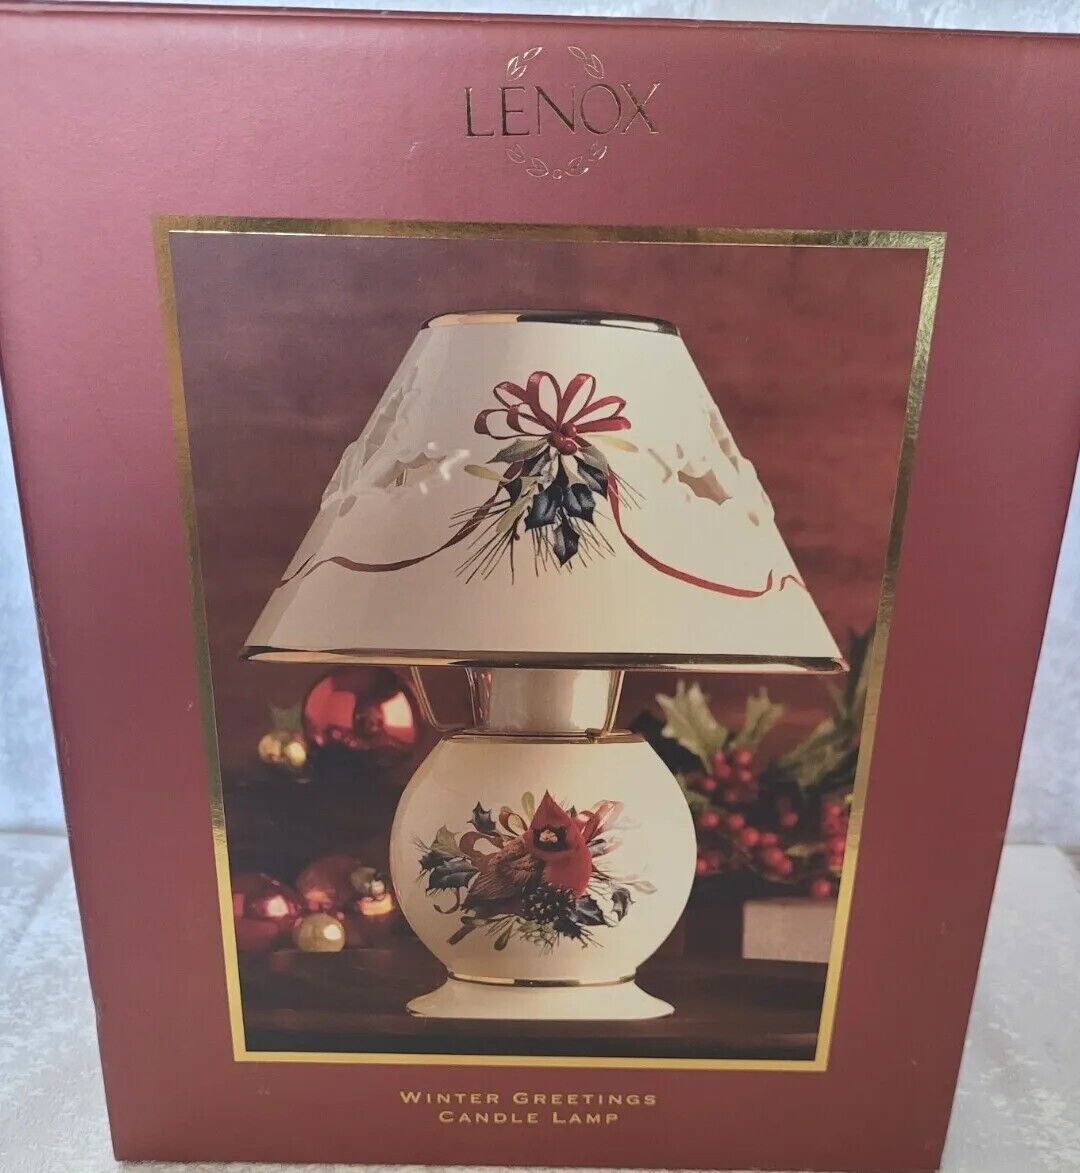 Lenox Winter Greetings Holiday Candle Lamp 10 in.